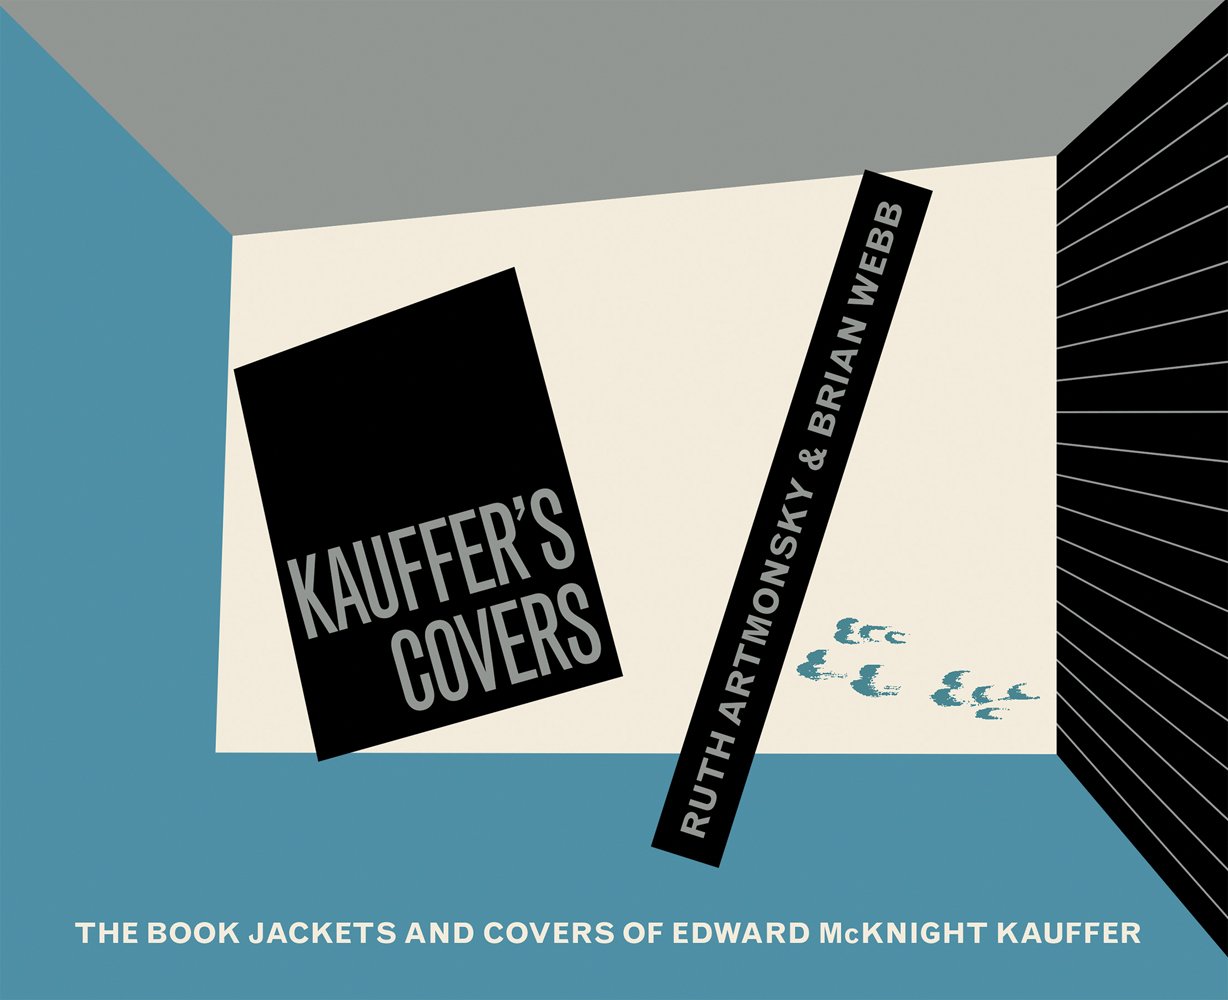 Black, blue and grey graphic cover with Kauffer’s Covers in grey font on black square and The Book Jackets and Covers of Edward McKnight Kauffer in white font below